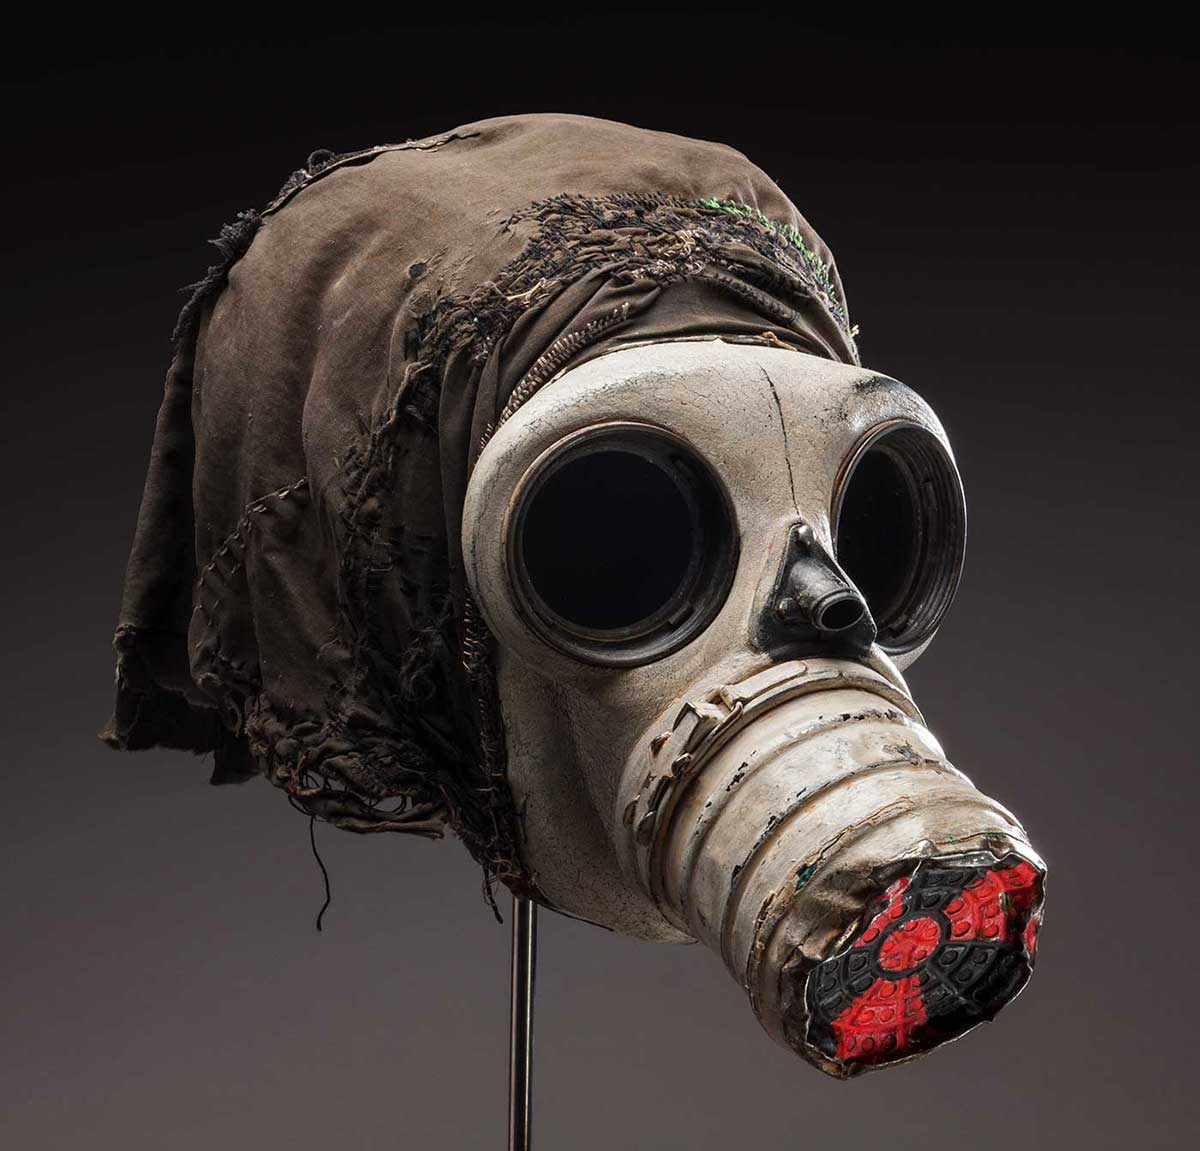 Gas mask with black cloth attached to the back and the international symbol for radiation painted in red on the nose cone.